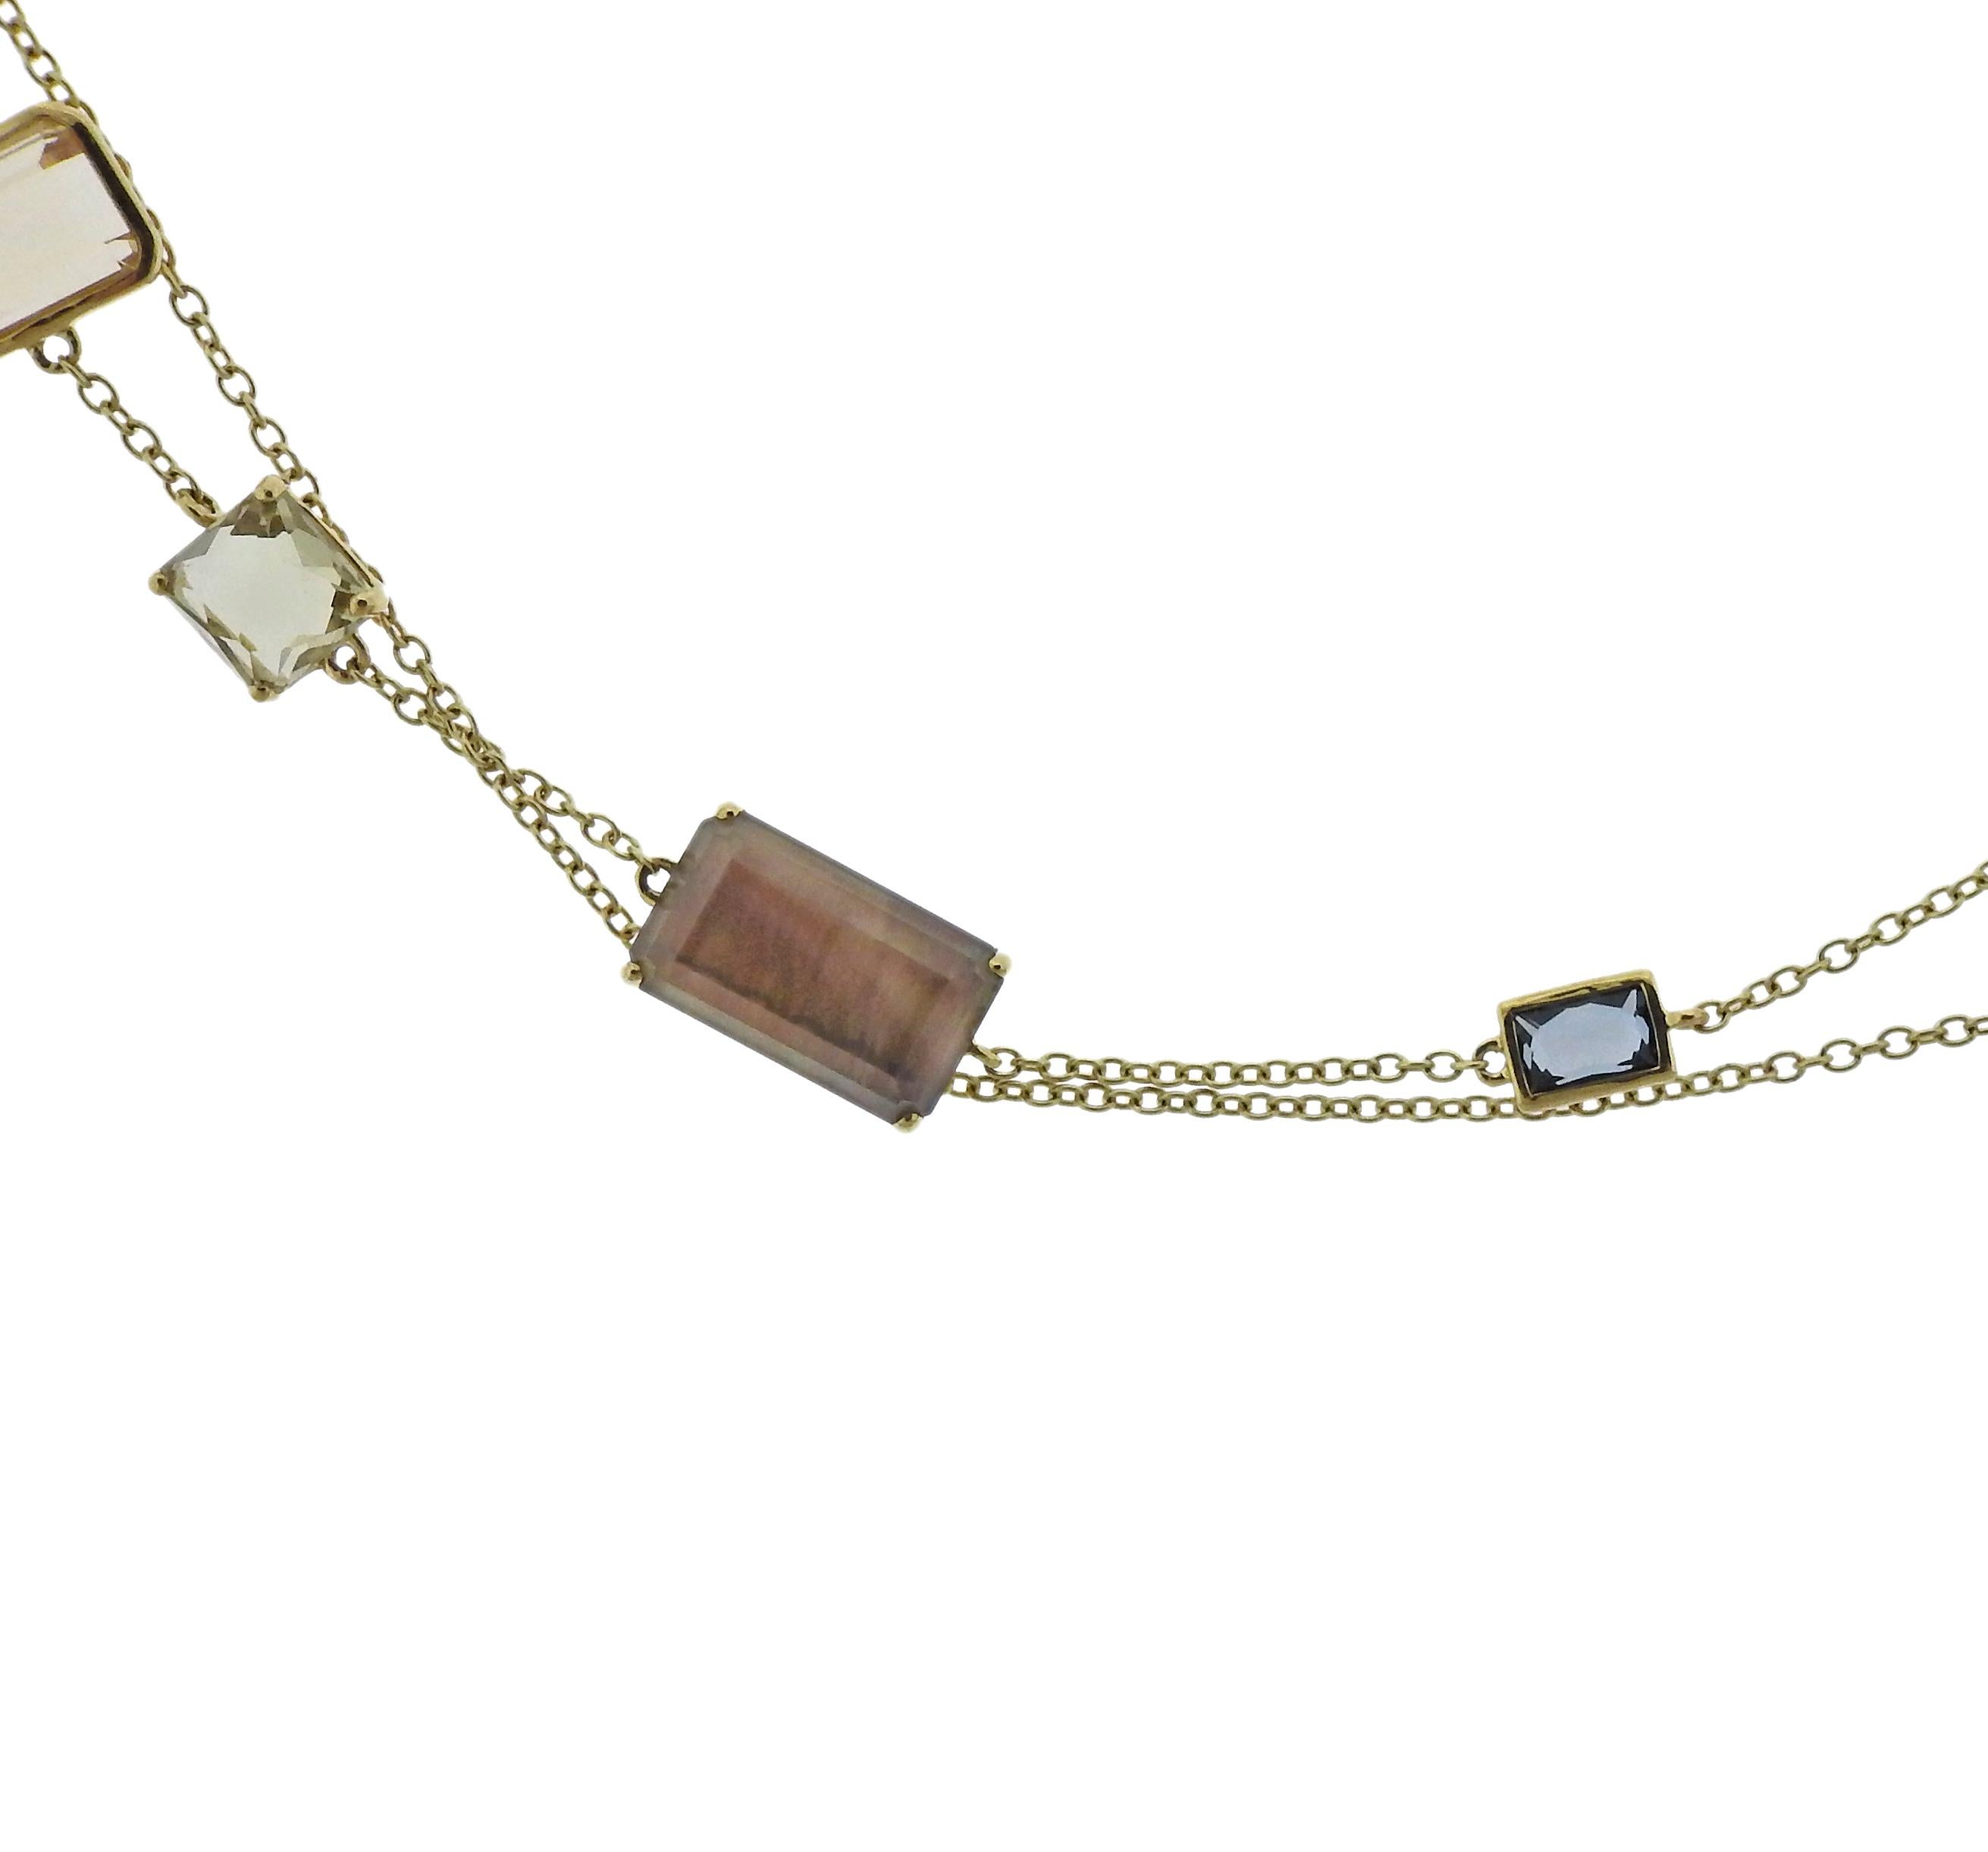 18k gold long station necklace, crafted by Ippolita, set with  Quartz, Citrine, Mother of Pearl. Necklace is 36